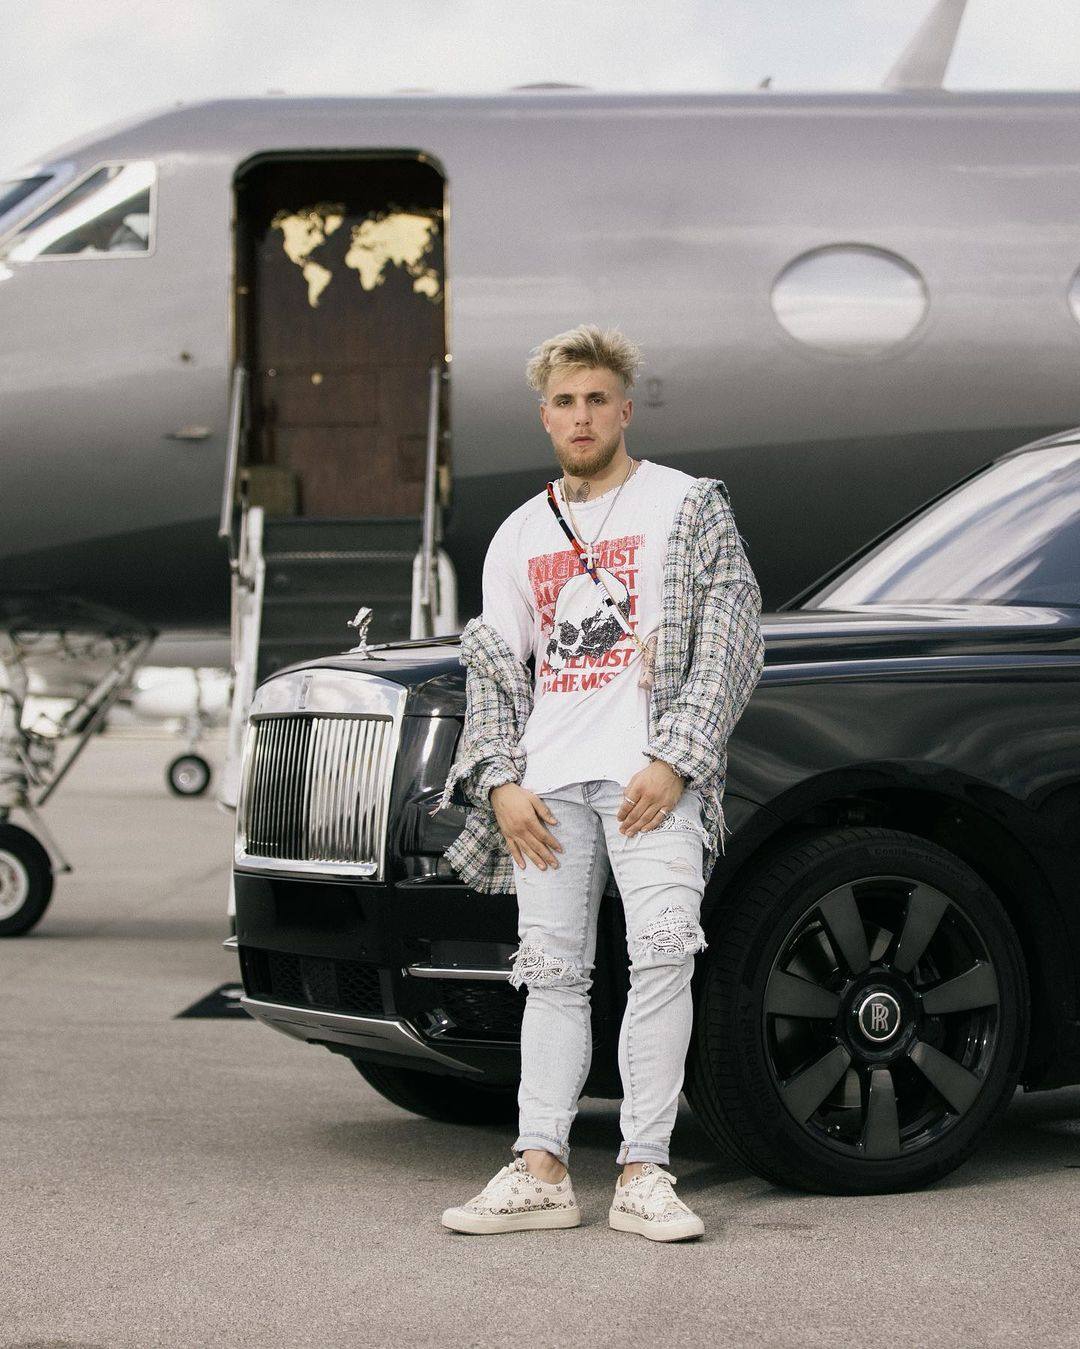 YouTuber and professional boxer Jake Paul, set for his next fight on August 29, loves to spend on fast cars and blinging jewellery Photo: @jakepaul/Instagram